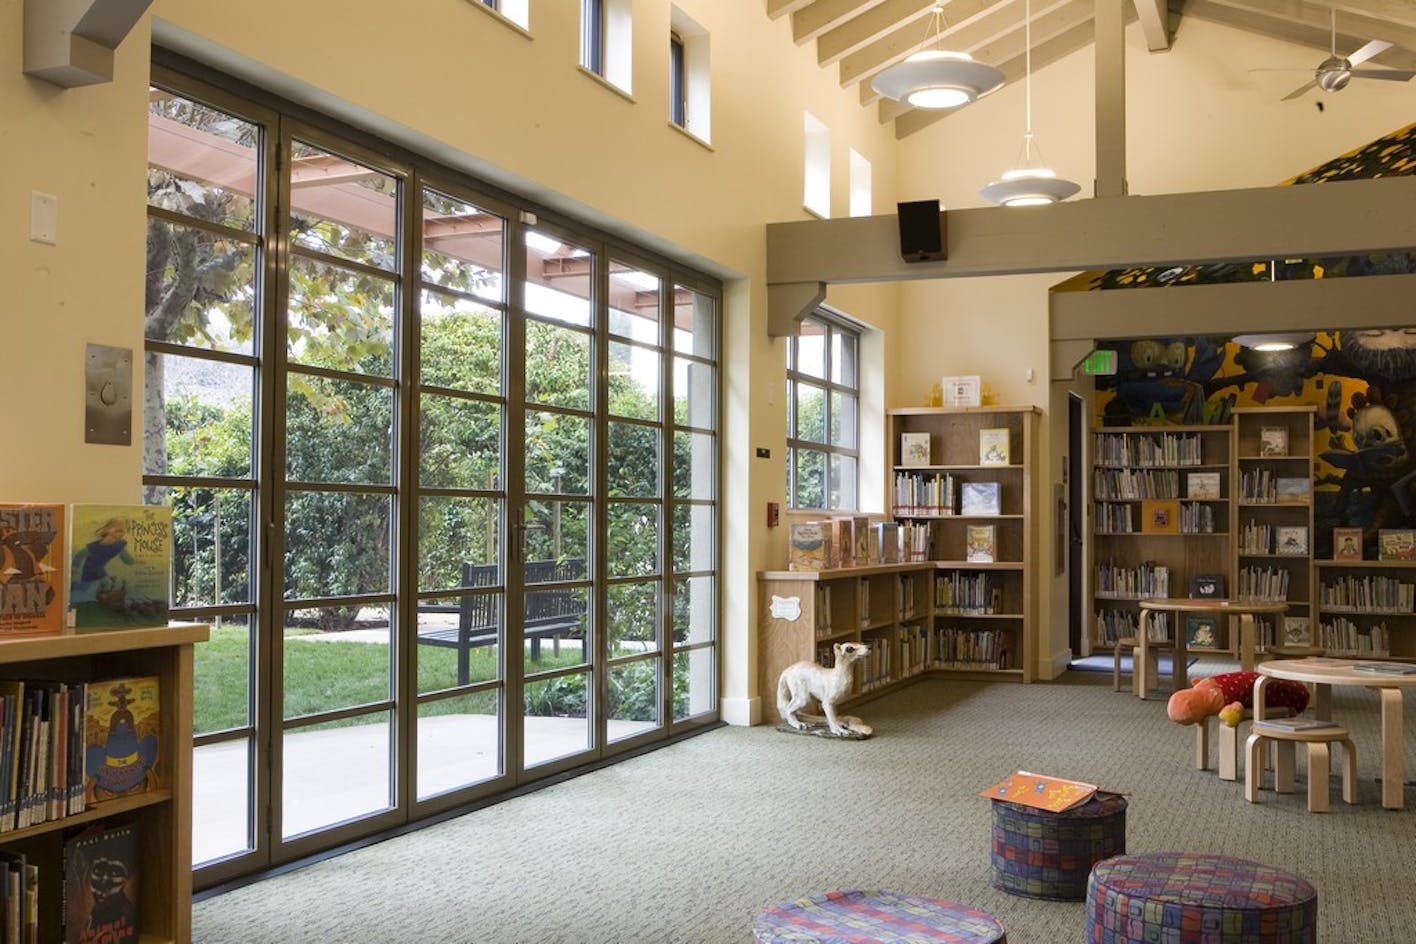 school-library-with-folding-doors-adds-natural-daylight-and-biophilic-design